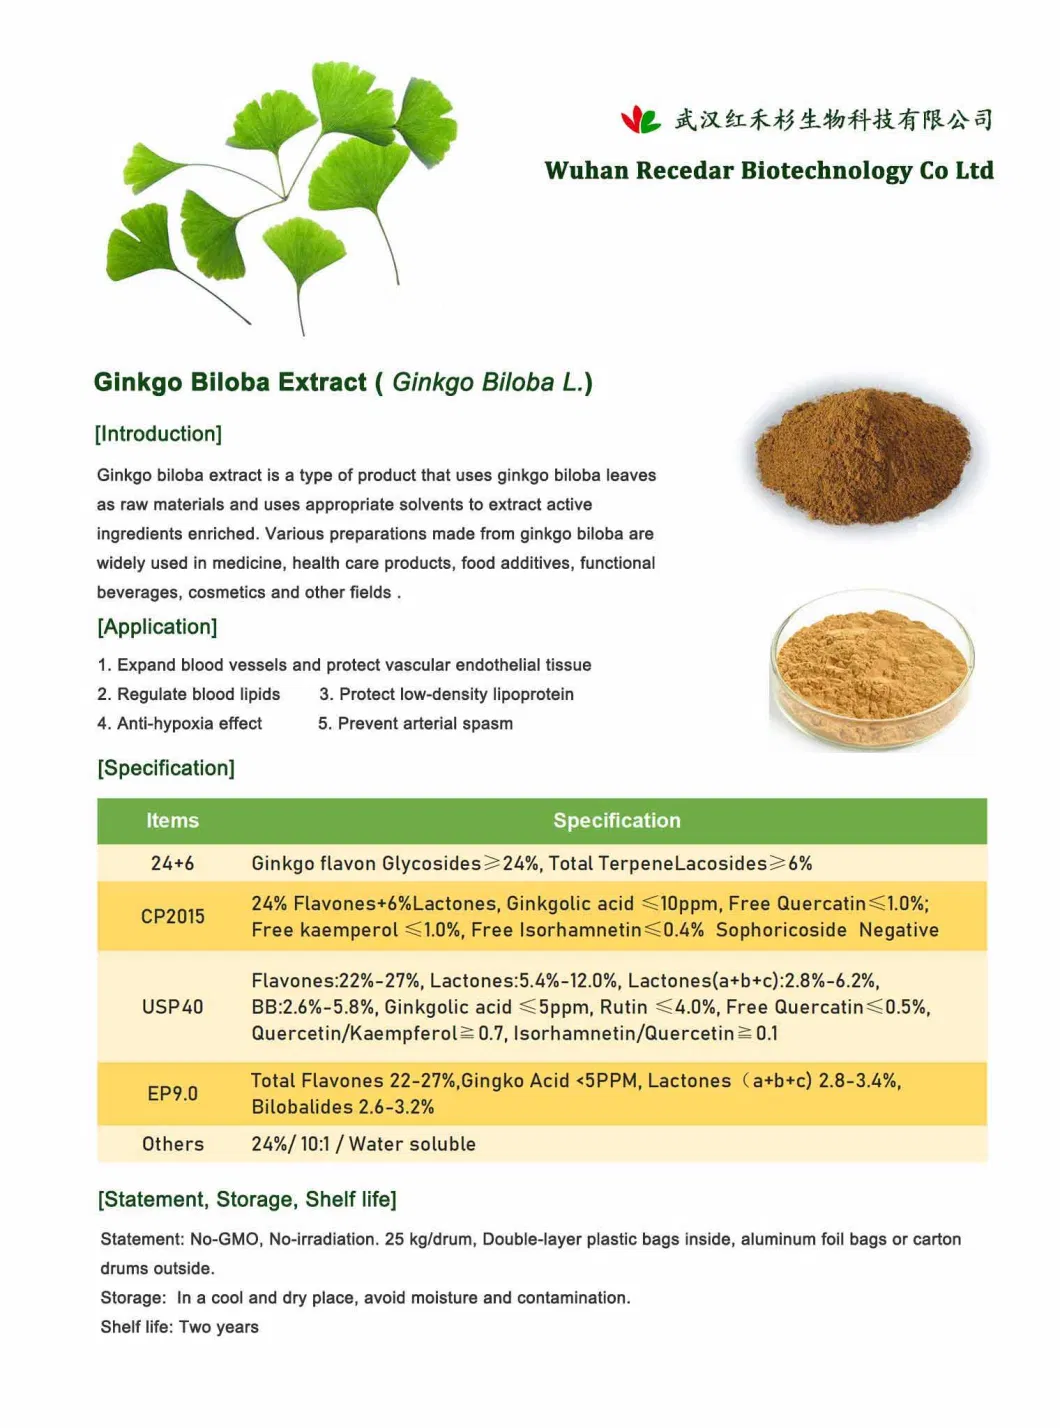 Ginkgo Biloba Leaf Extract Powder for Nutraceutical Plant Herbal Extract